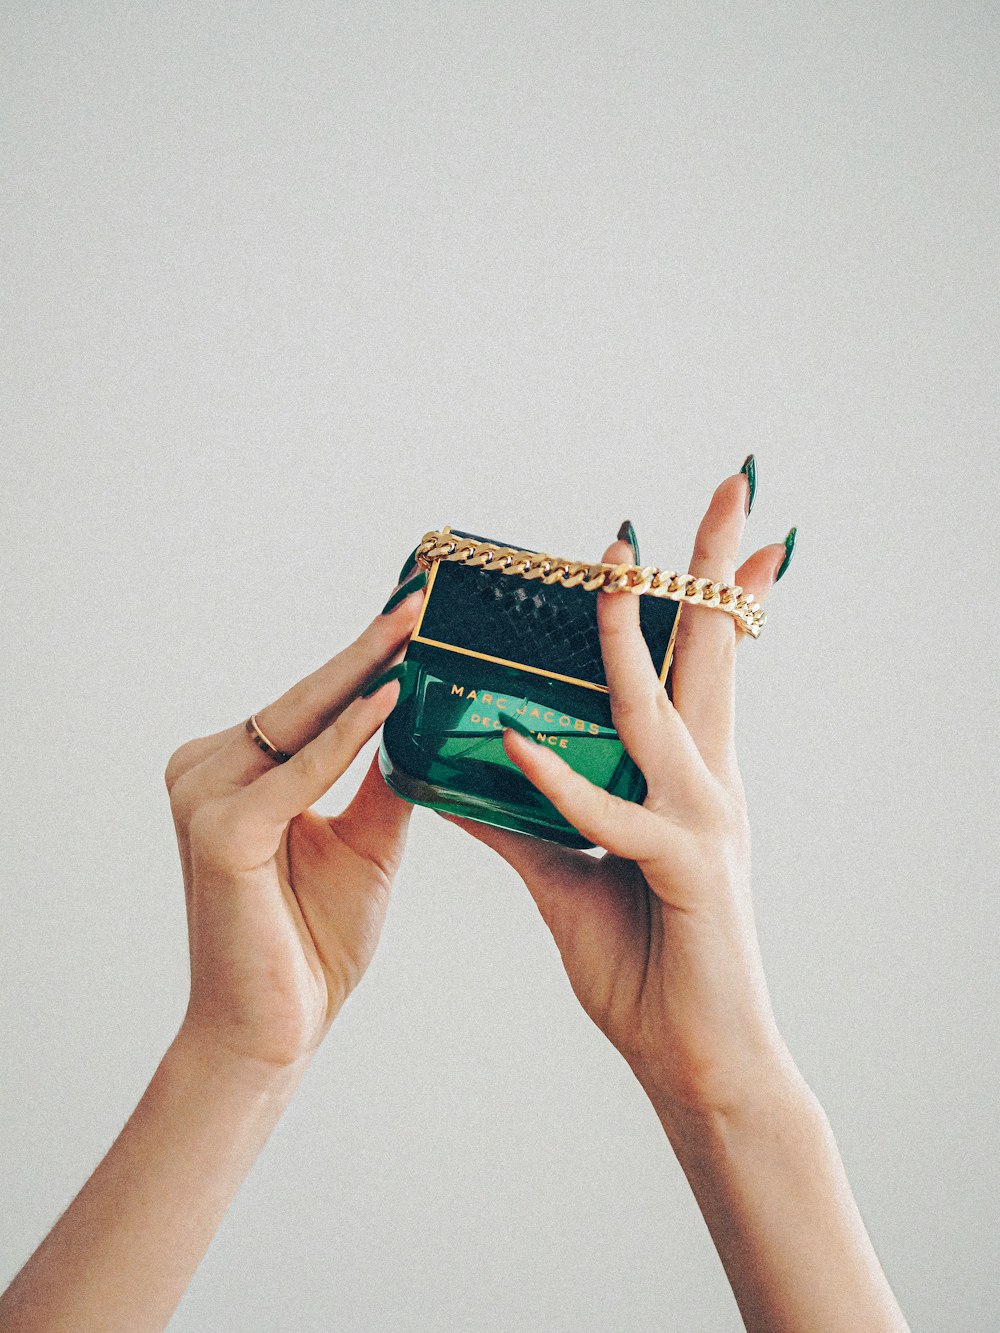 person holding green and brown book